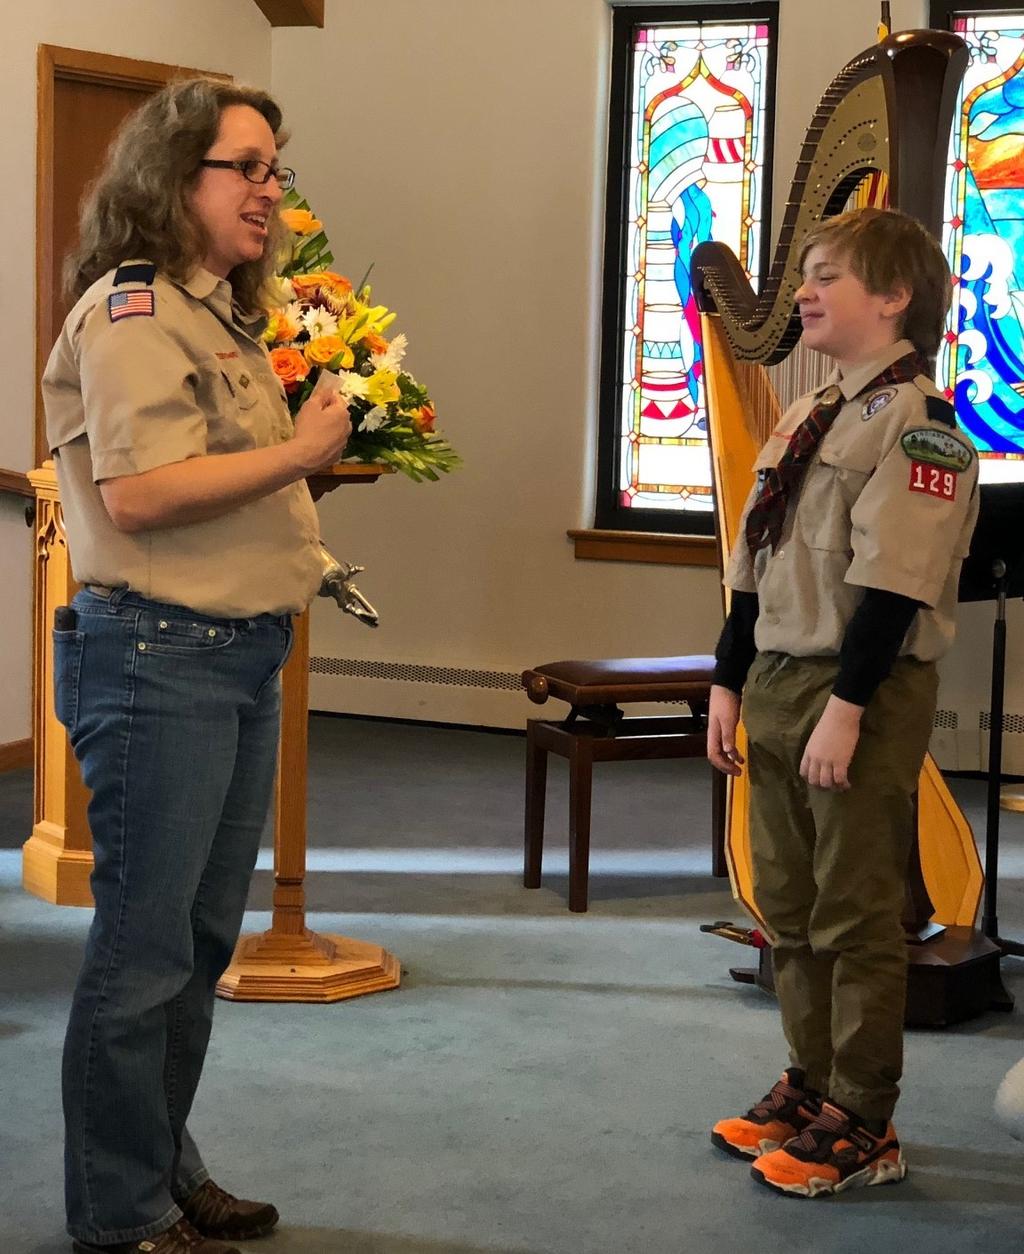 Brownie Caroline Worden and Cub Scout Logan Worden received the day s offering and brought it forward to be blessed by Reverend Napoli.